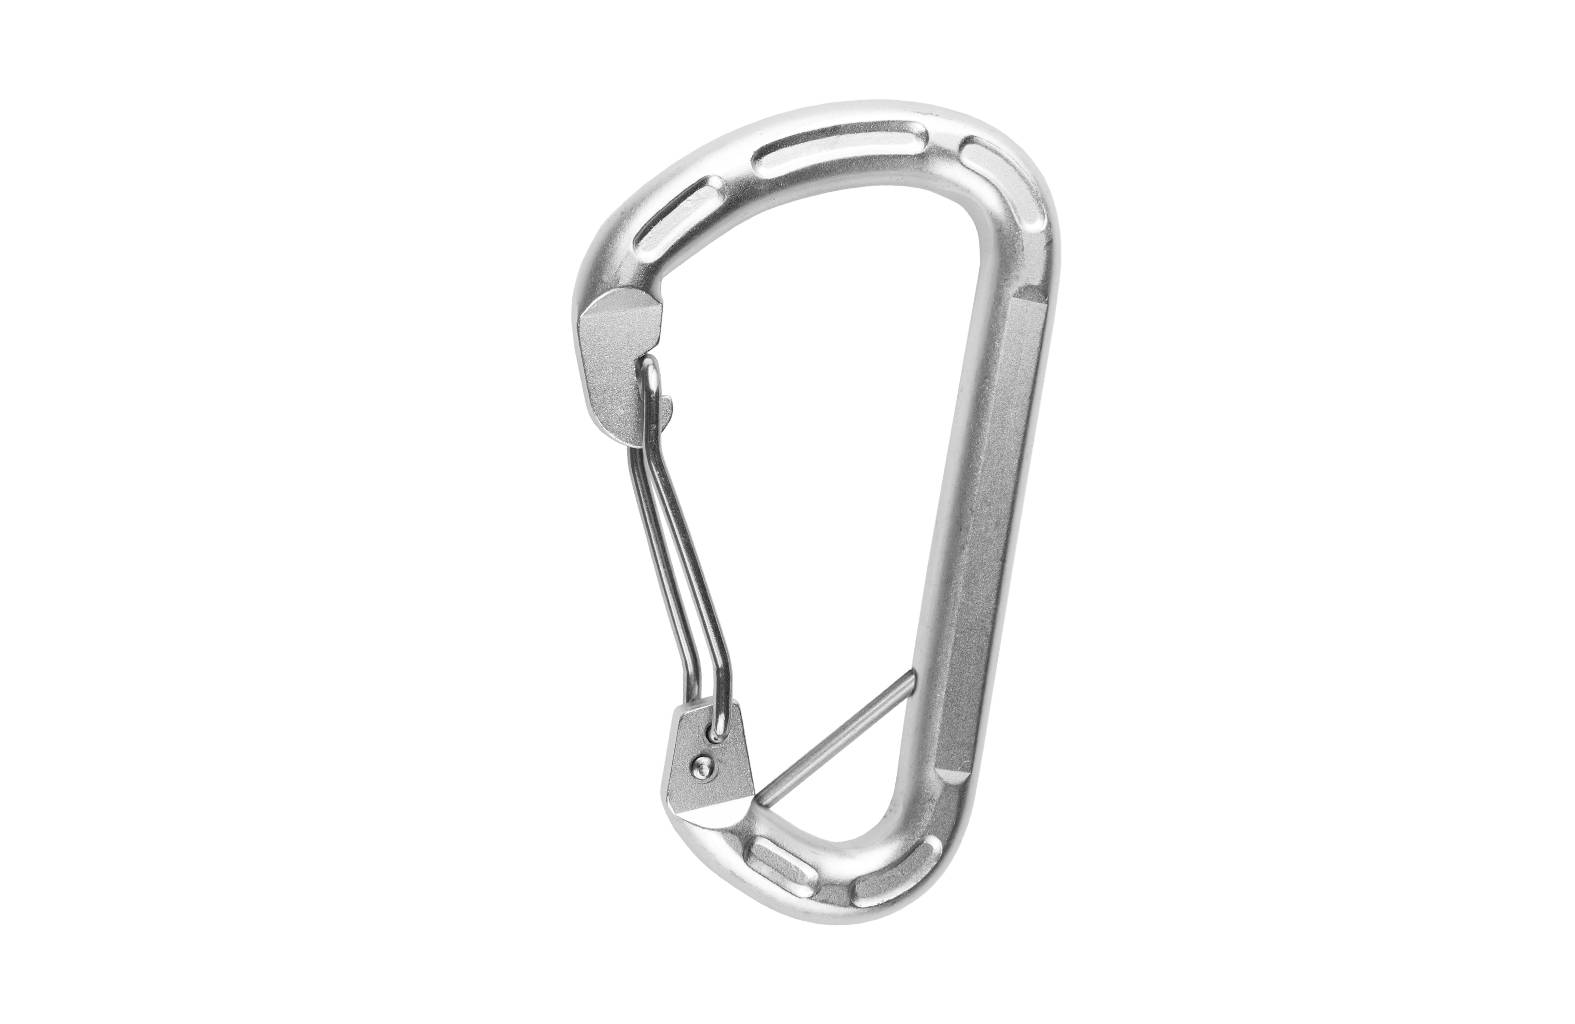 Grivel steel carabiners s2w Fast and Light ch